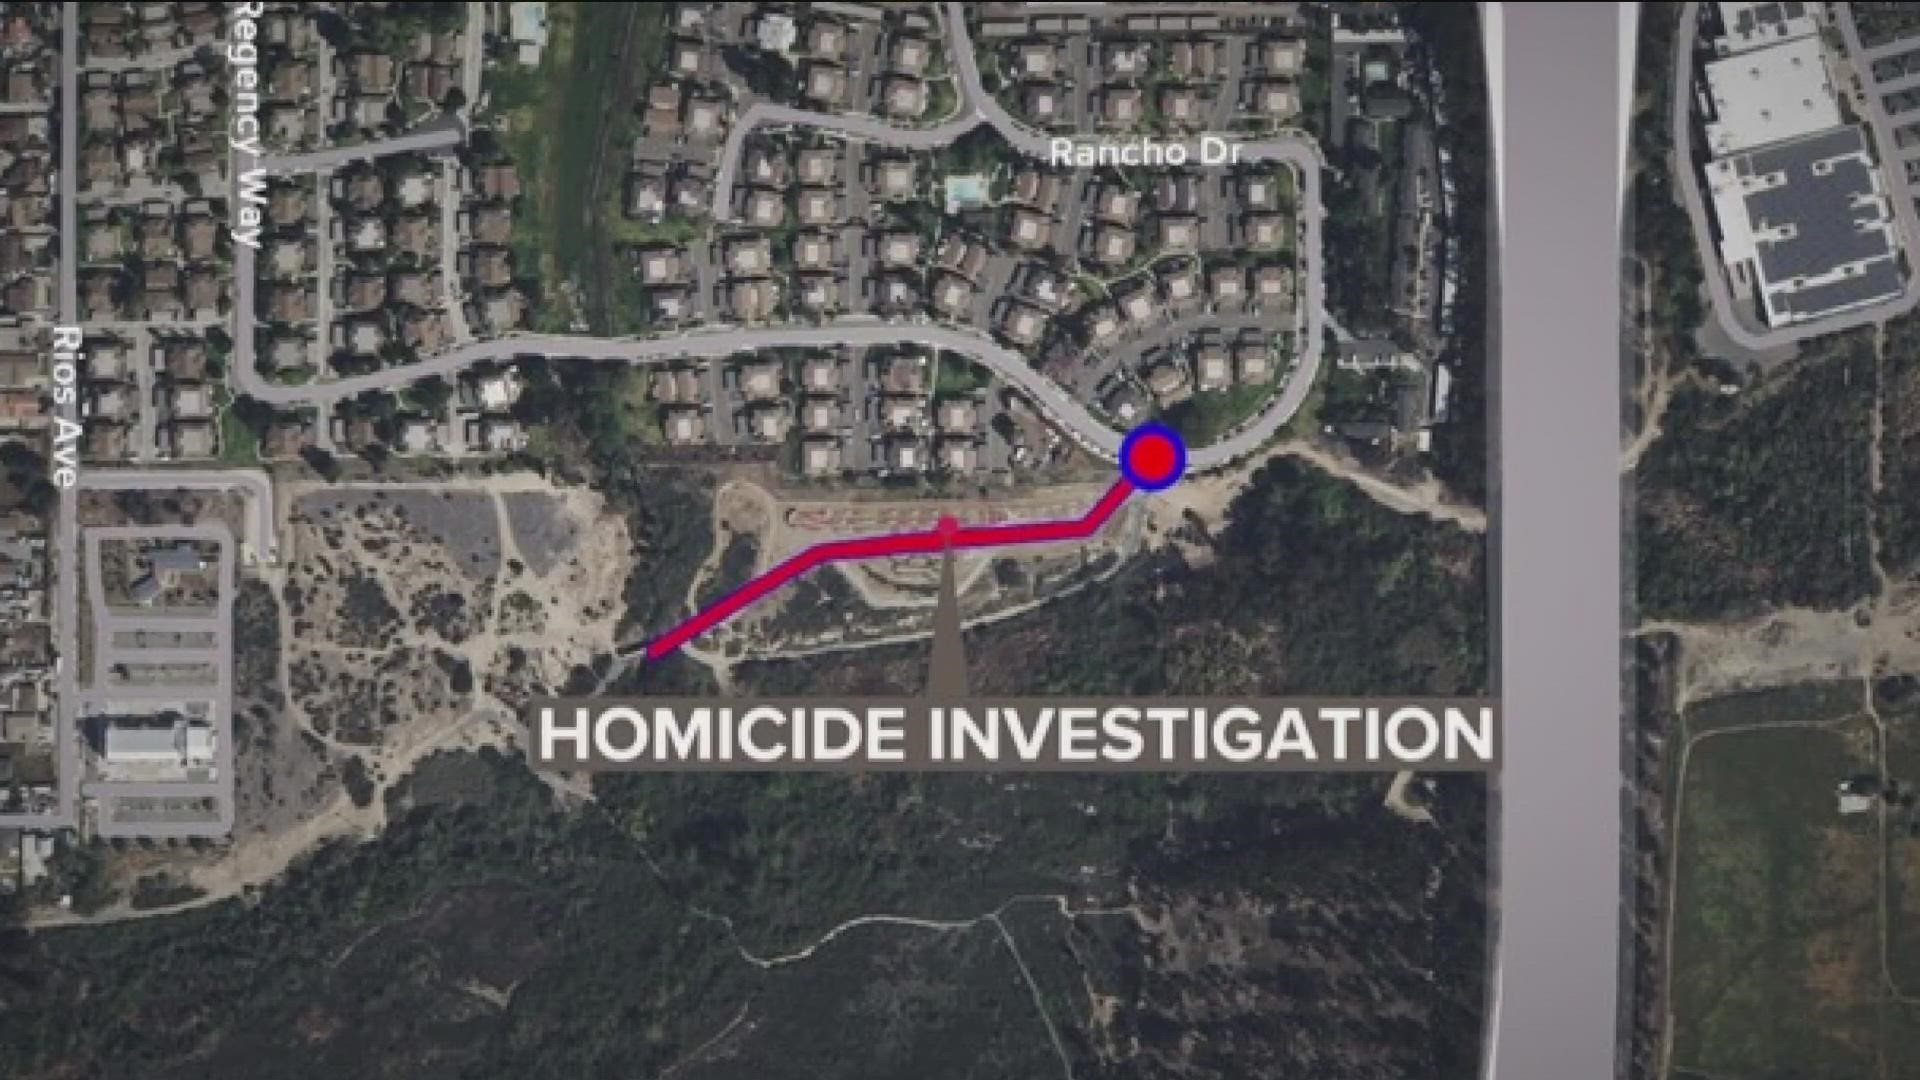 First responders were called to an area near Rancho Drive and Greg Cox Bike Park following reports that a man was found dead, according to police.